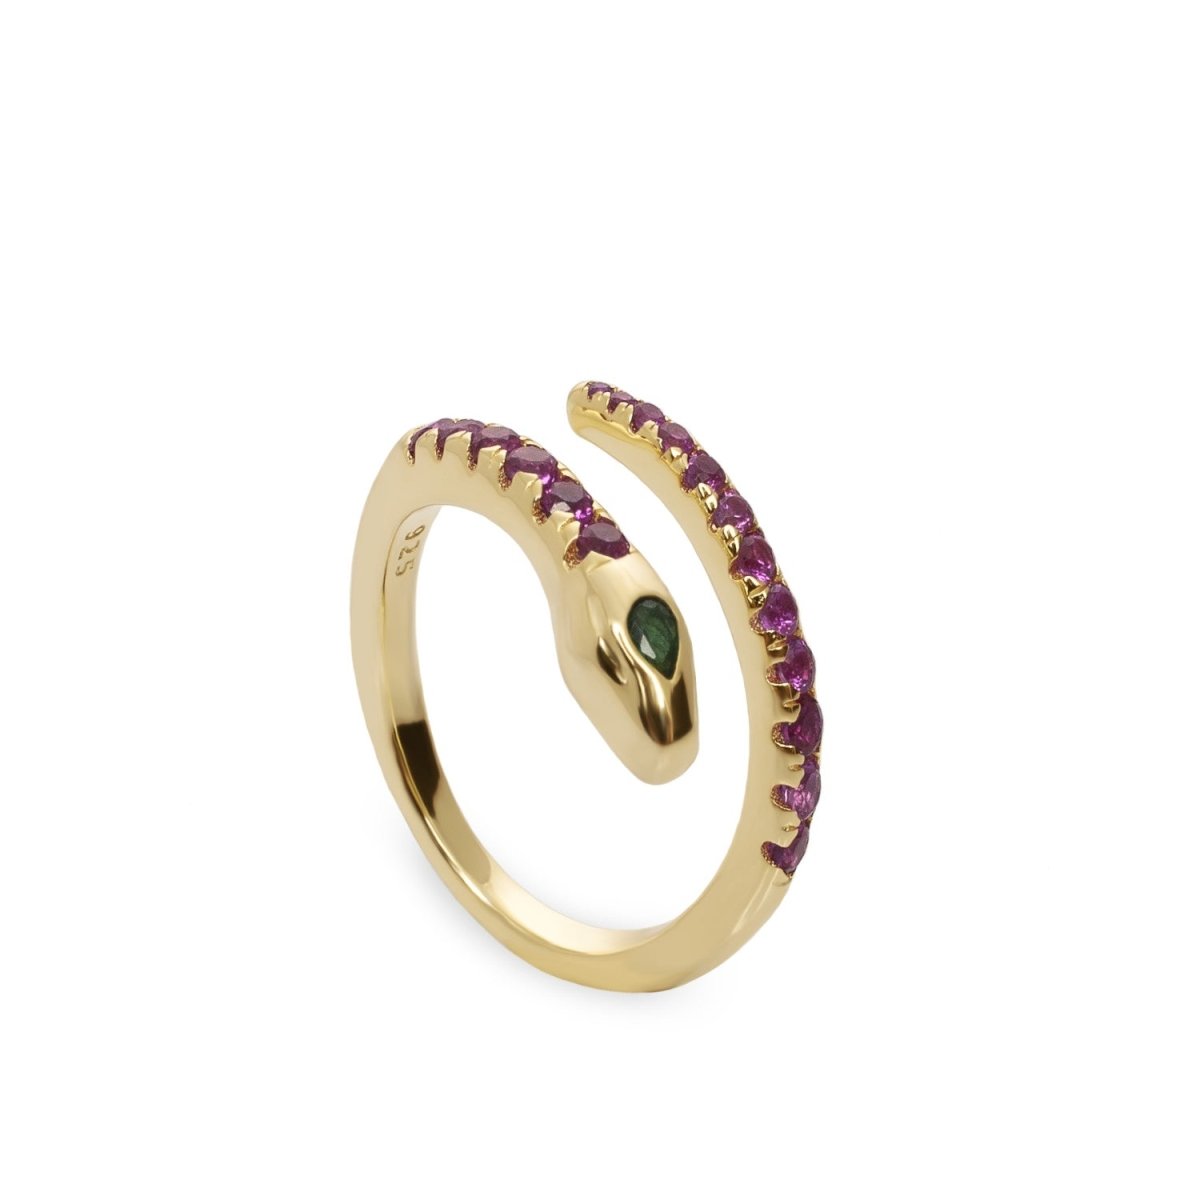 Ring - Snake silhouette design rings with purple zircons